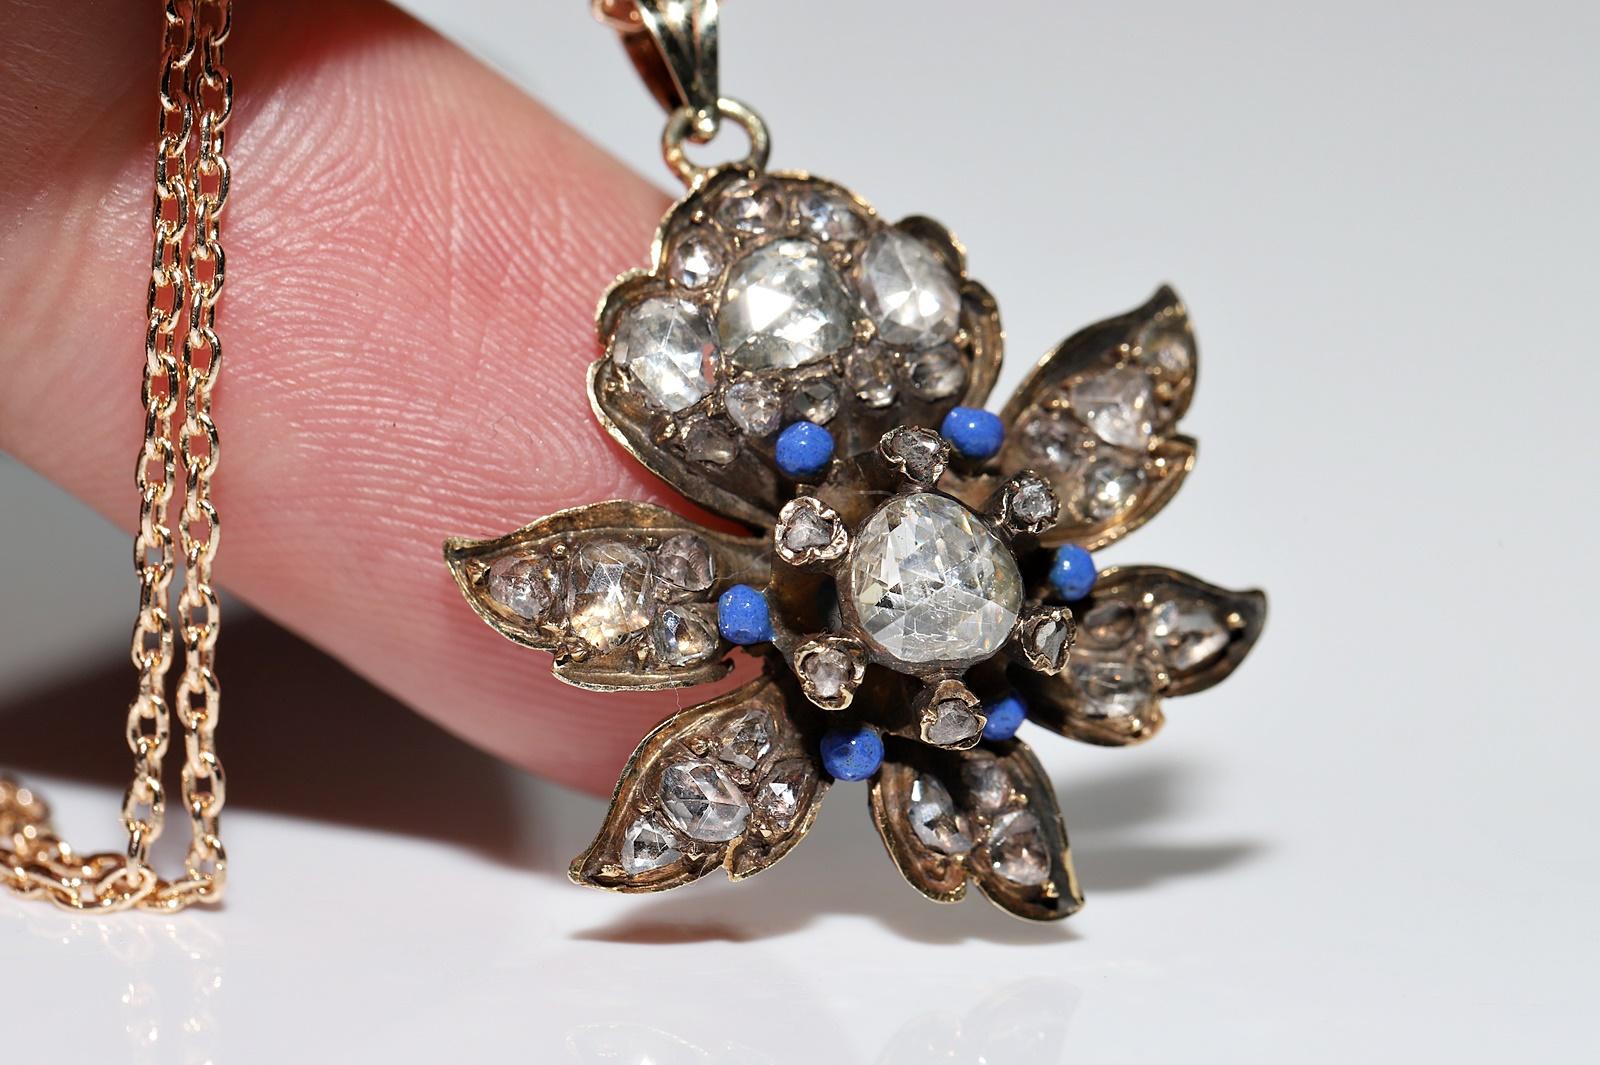 Antique Circa 1900s 14k Gold Natural Rose Cut Diamond Enamel Decorated Necklace For Sale 1